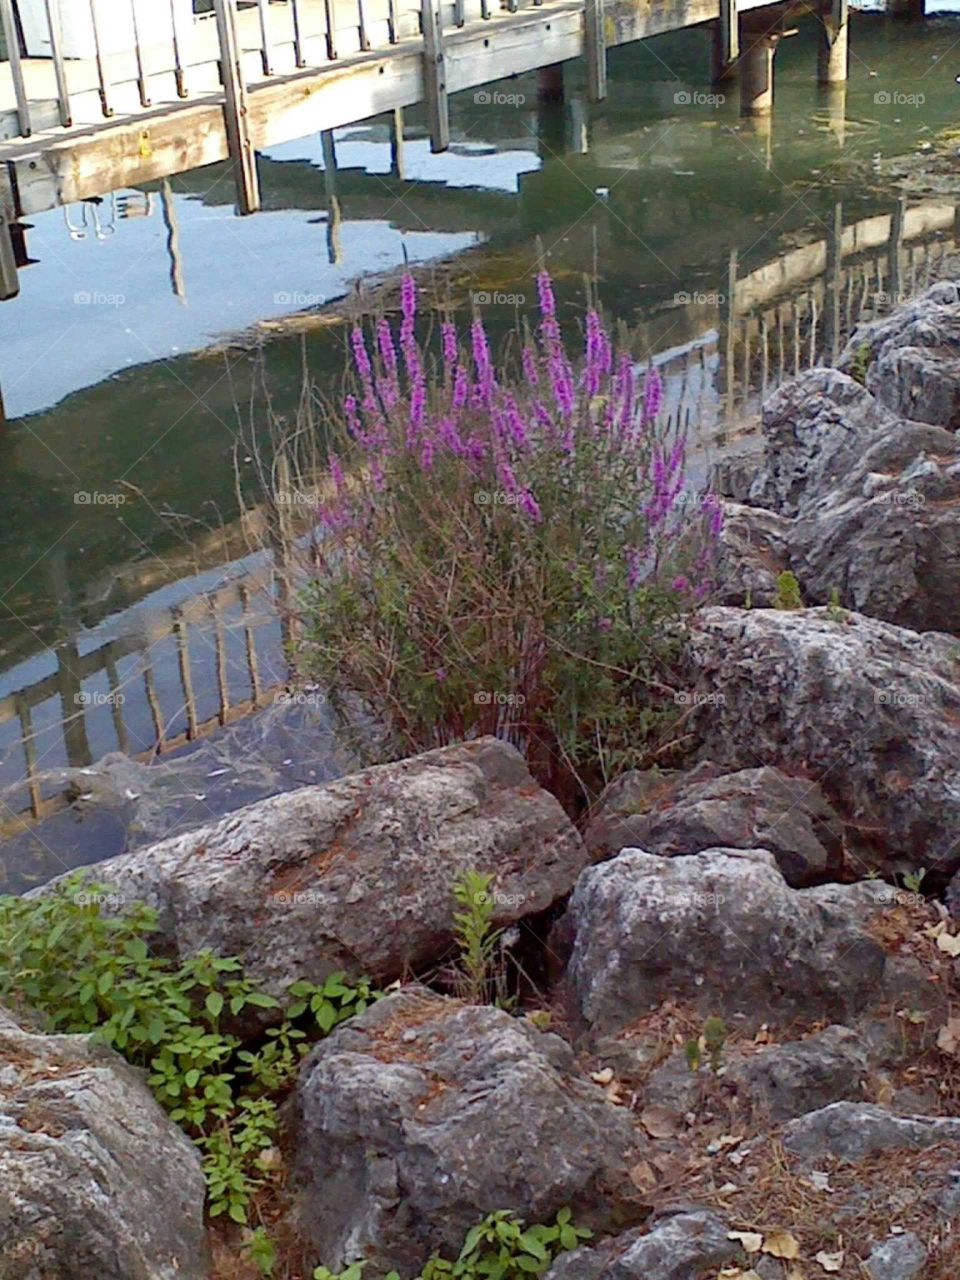 Wildflowers at the harbor